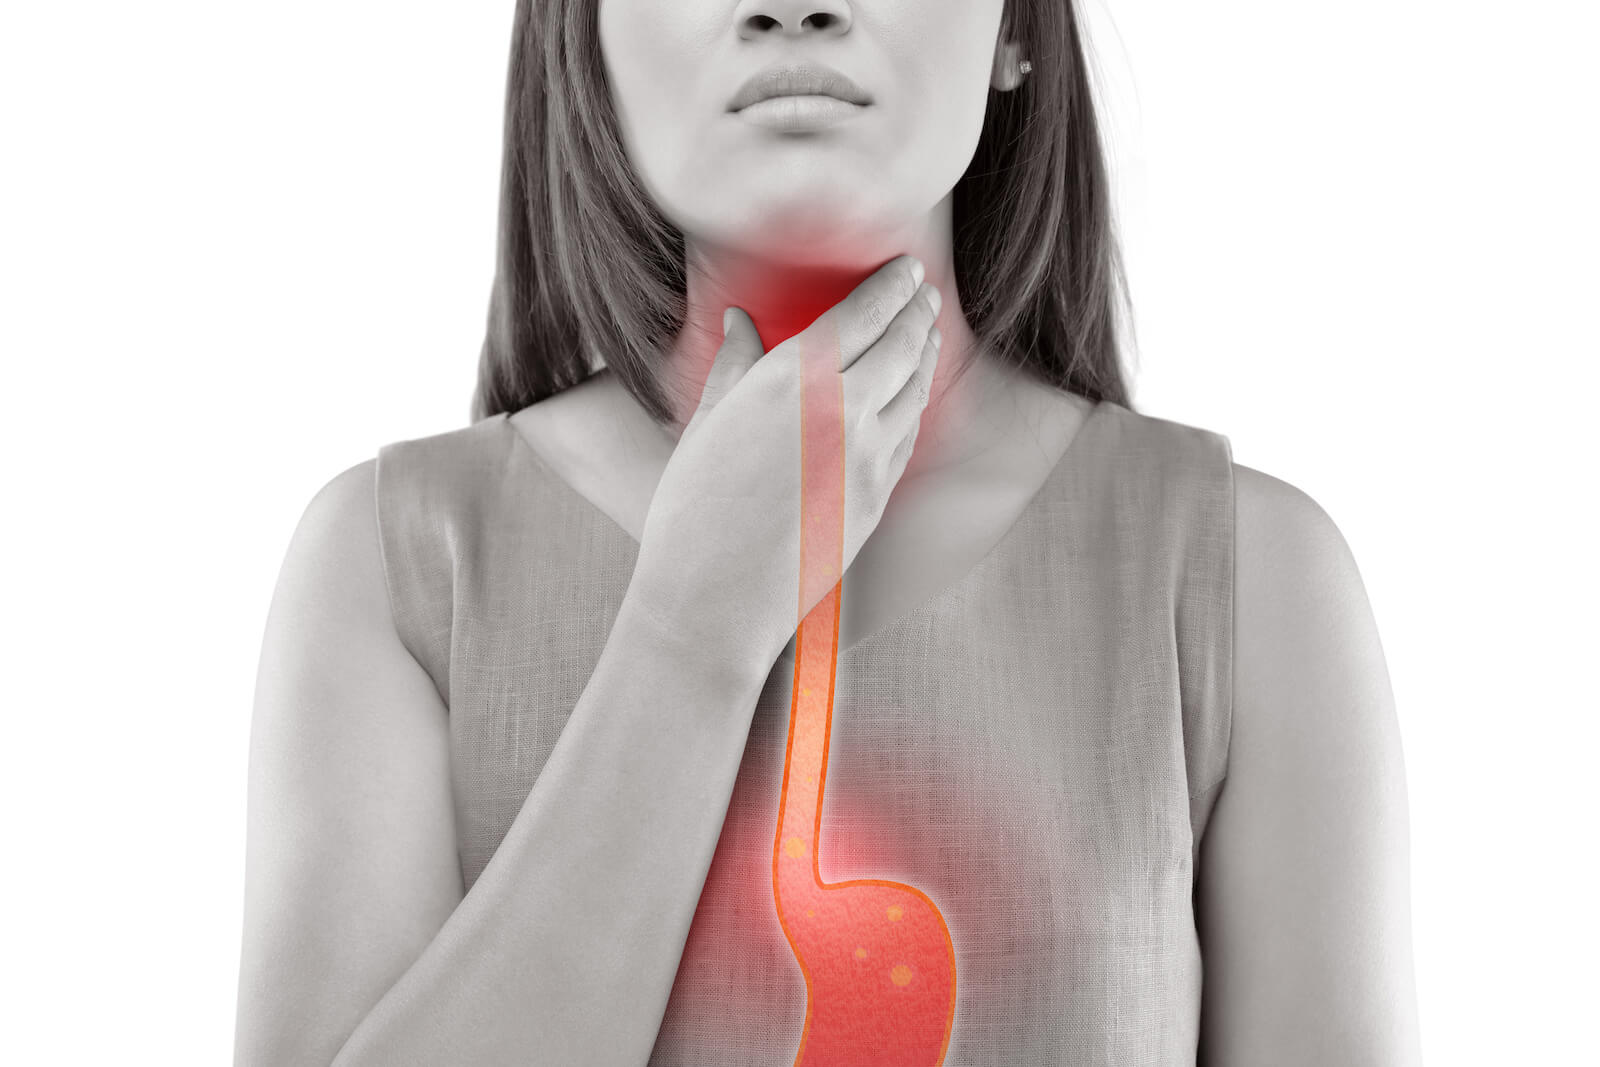 gastrointestinal symptoms: woman with an illustration of the stomach, touching her throat 